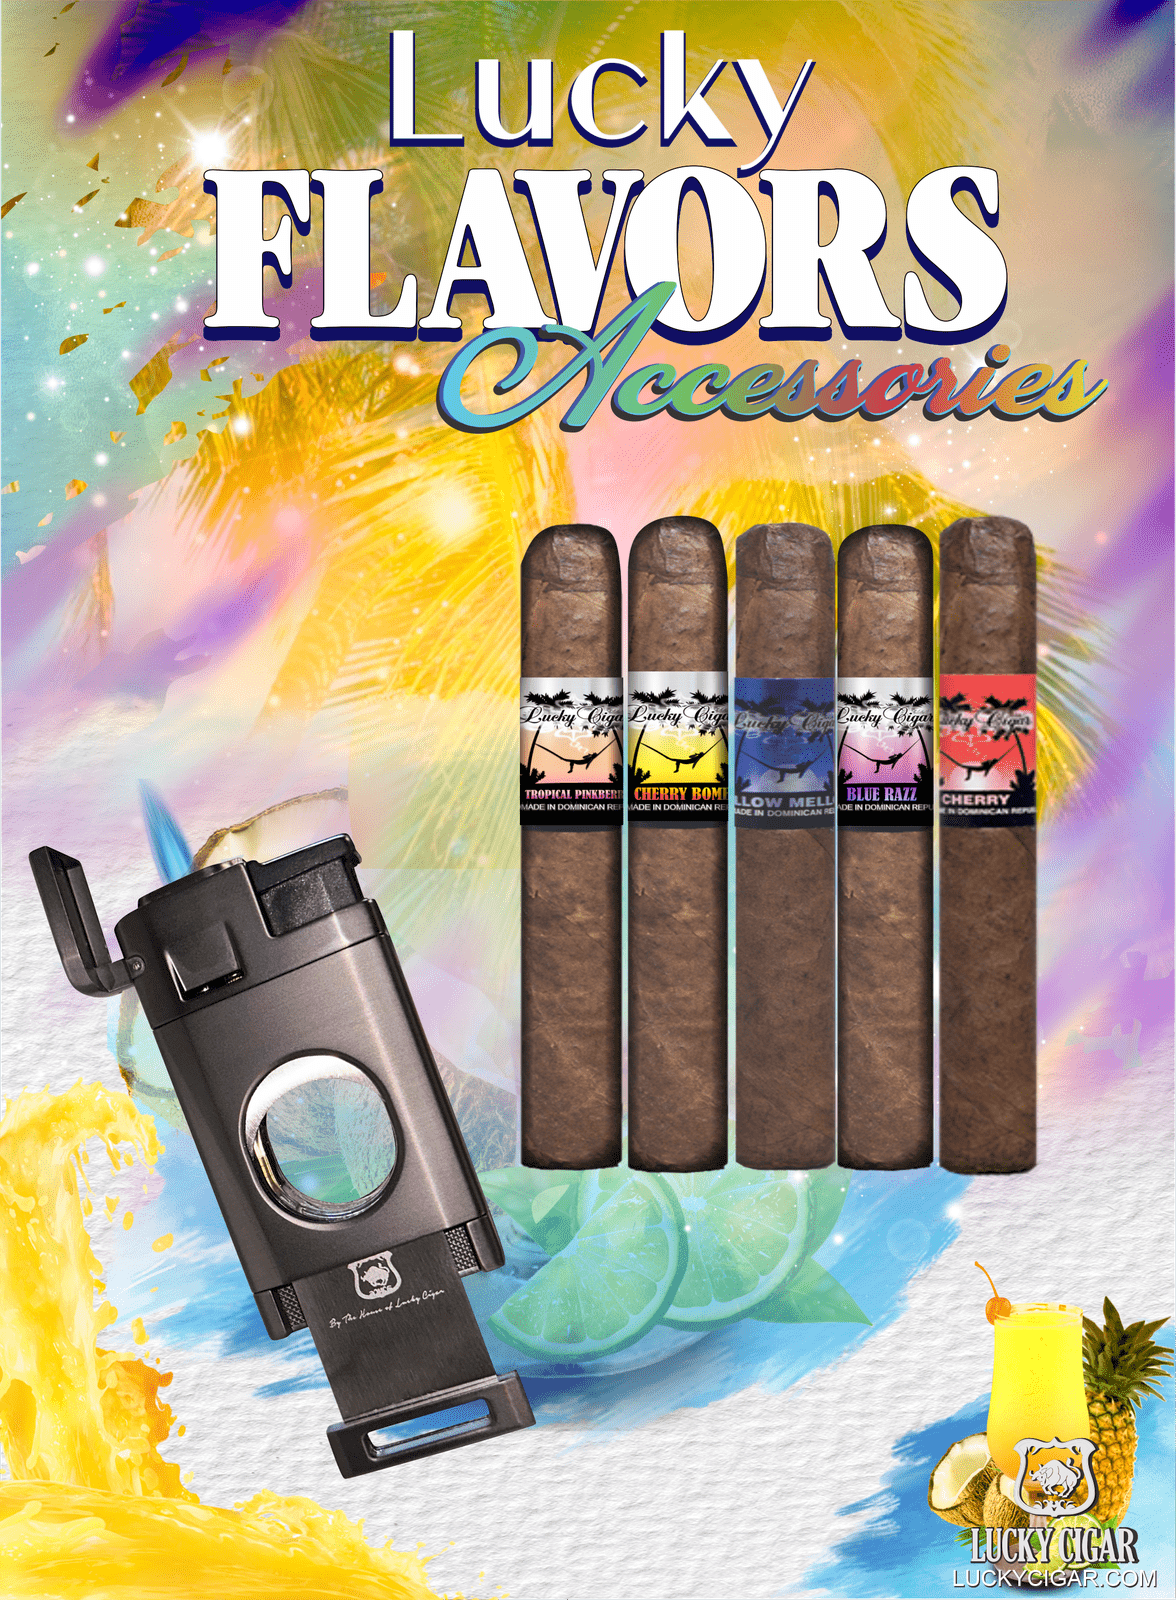 Flavored Cigars: Lucky Flavors 5 Cigar Set with Cutter Torch Lighter Combo